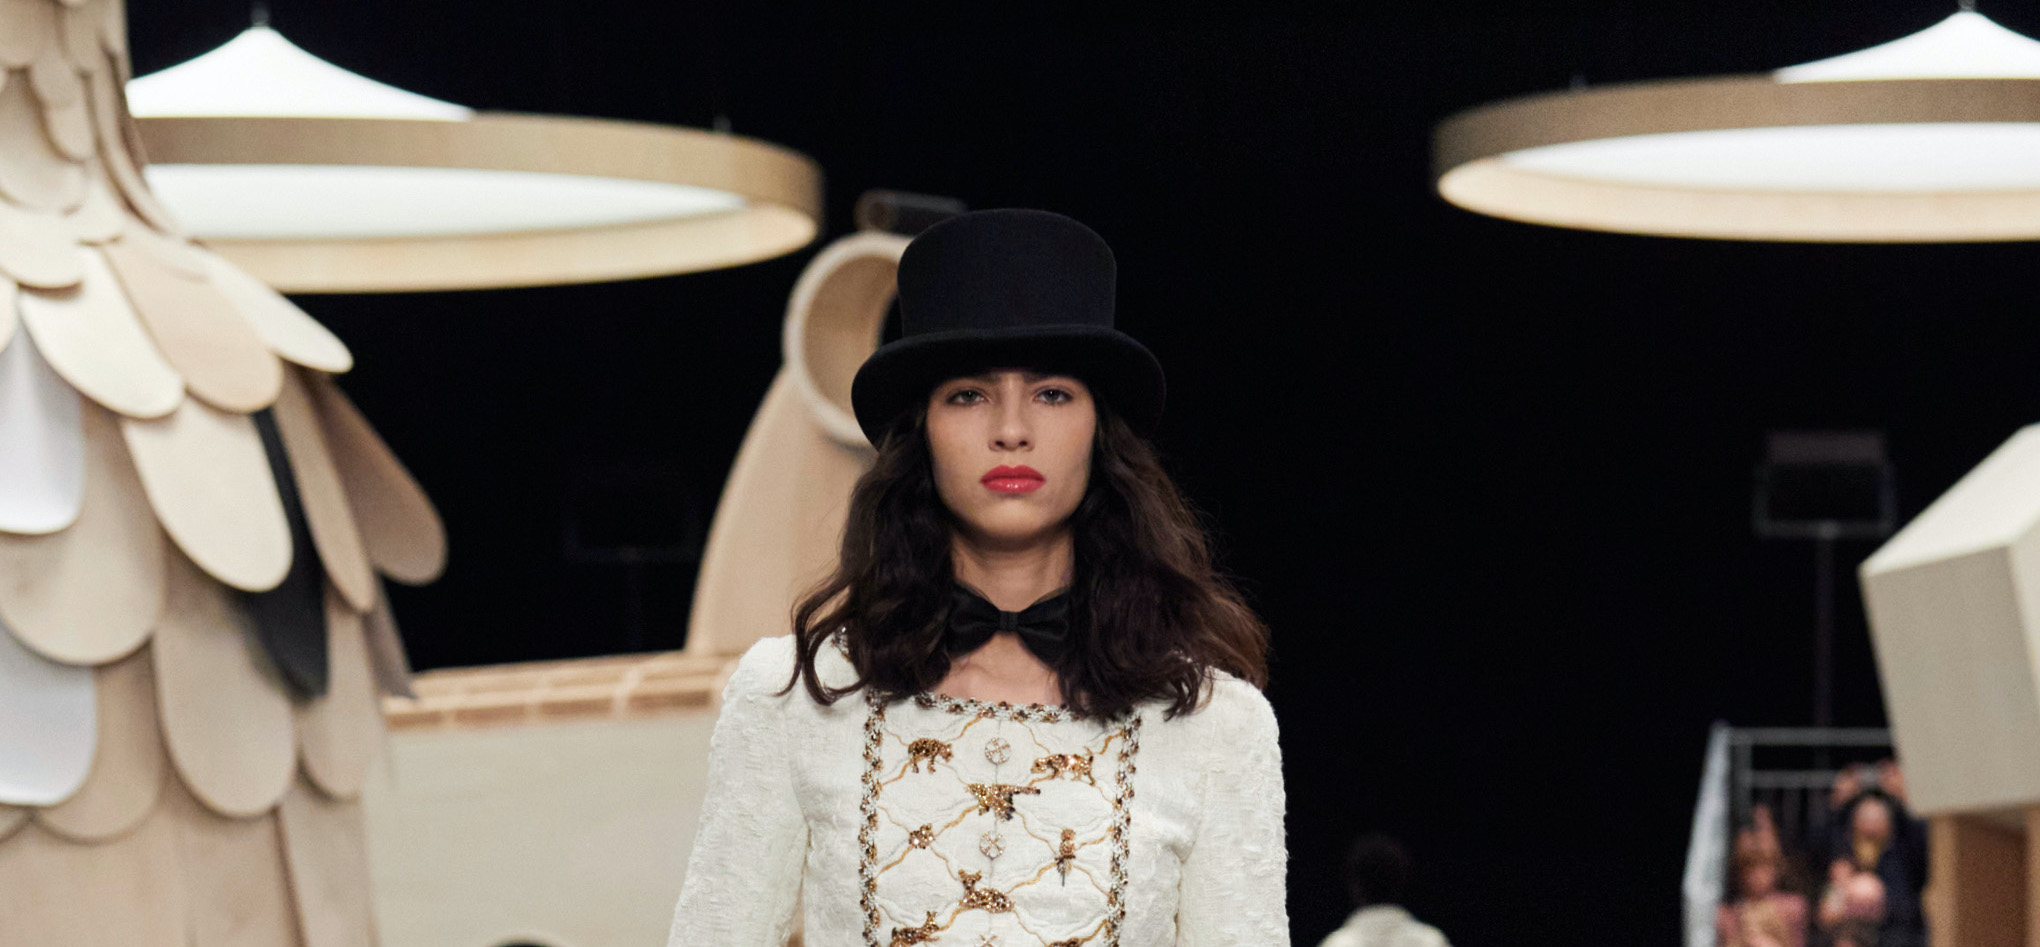 We prefer a dream over controversy': Chanel at Paris fashion week, Chanel